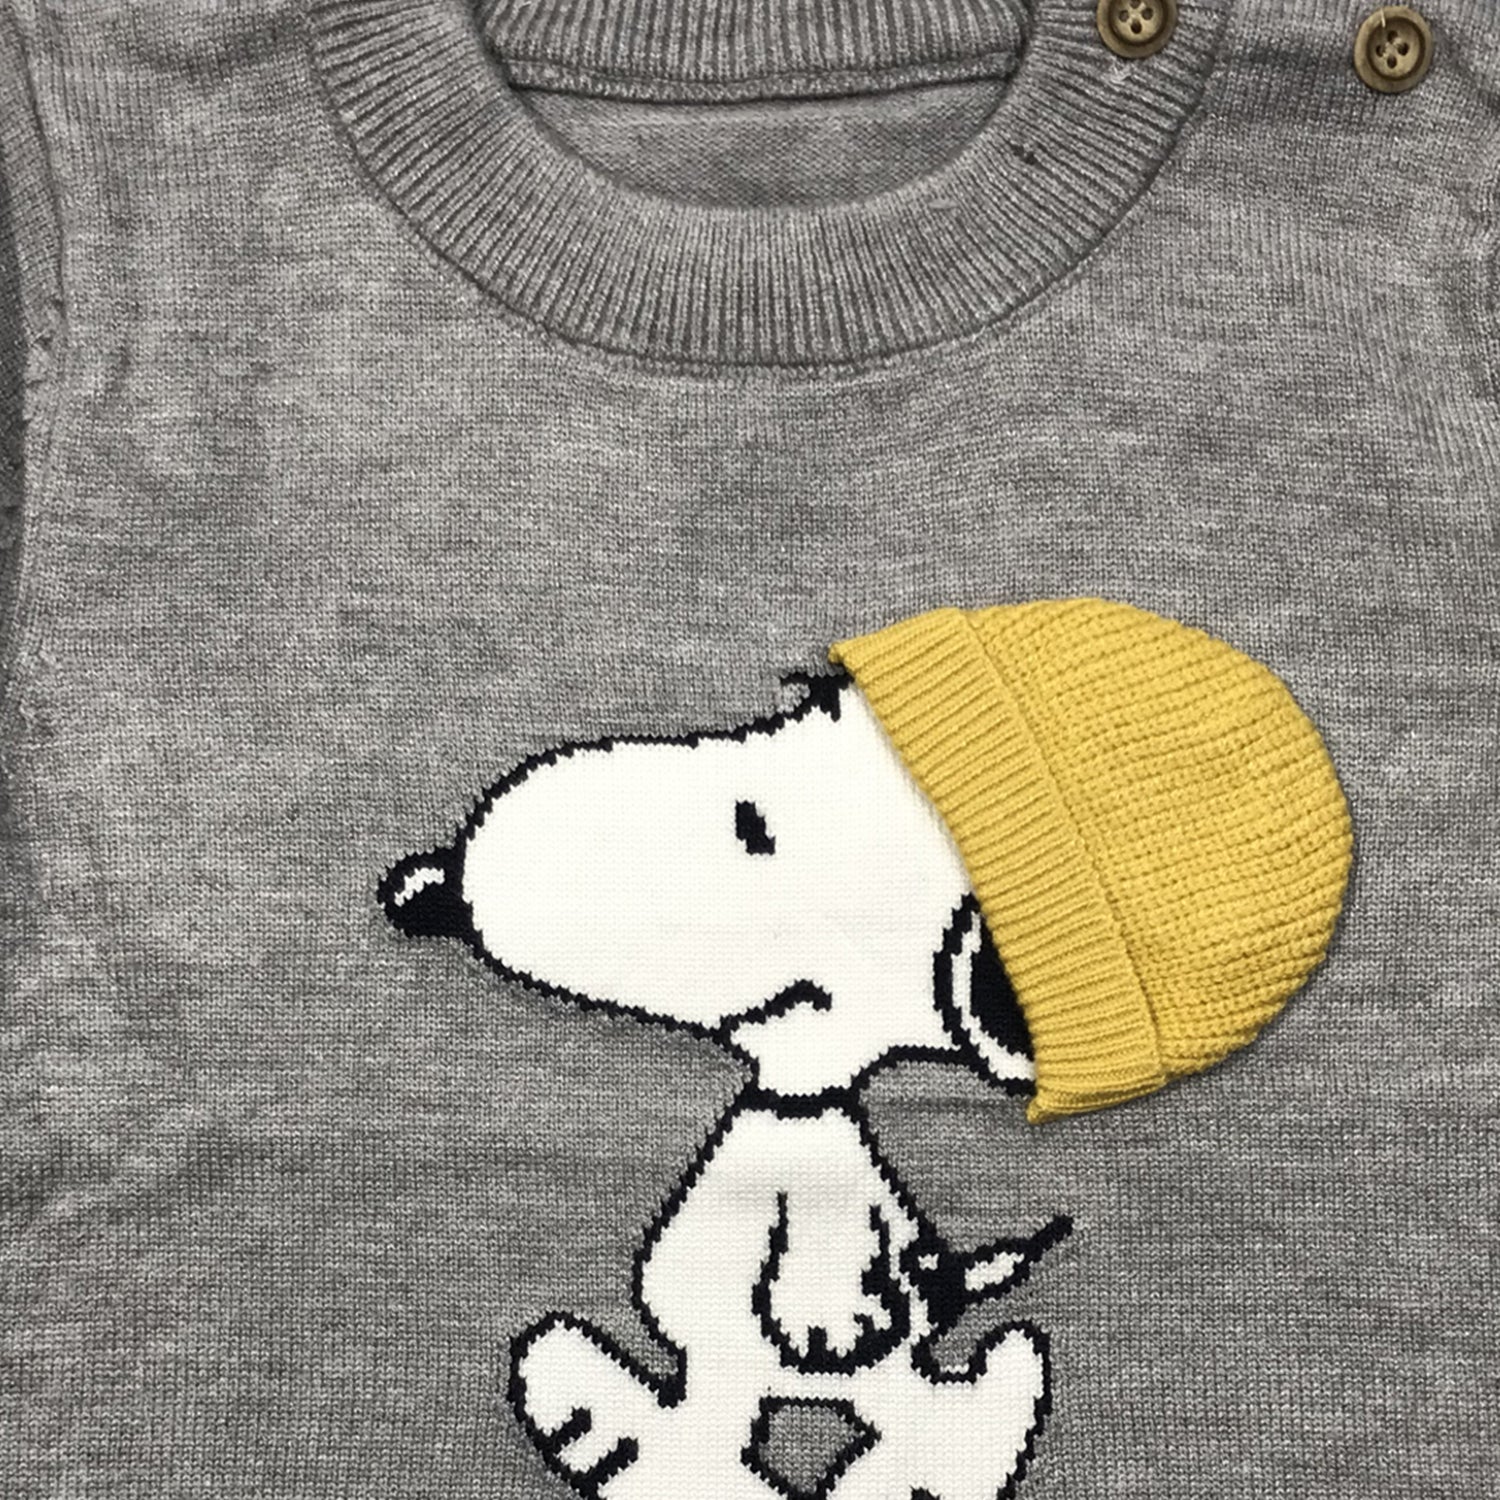 Moms Home Organic Cotton Unisex Baby Winter Sweaters Grey Snoopy